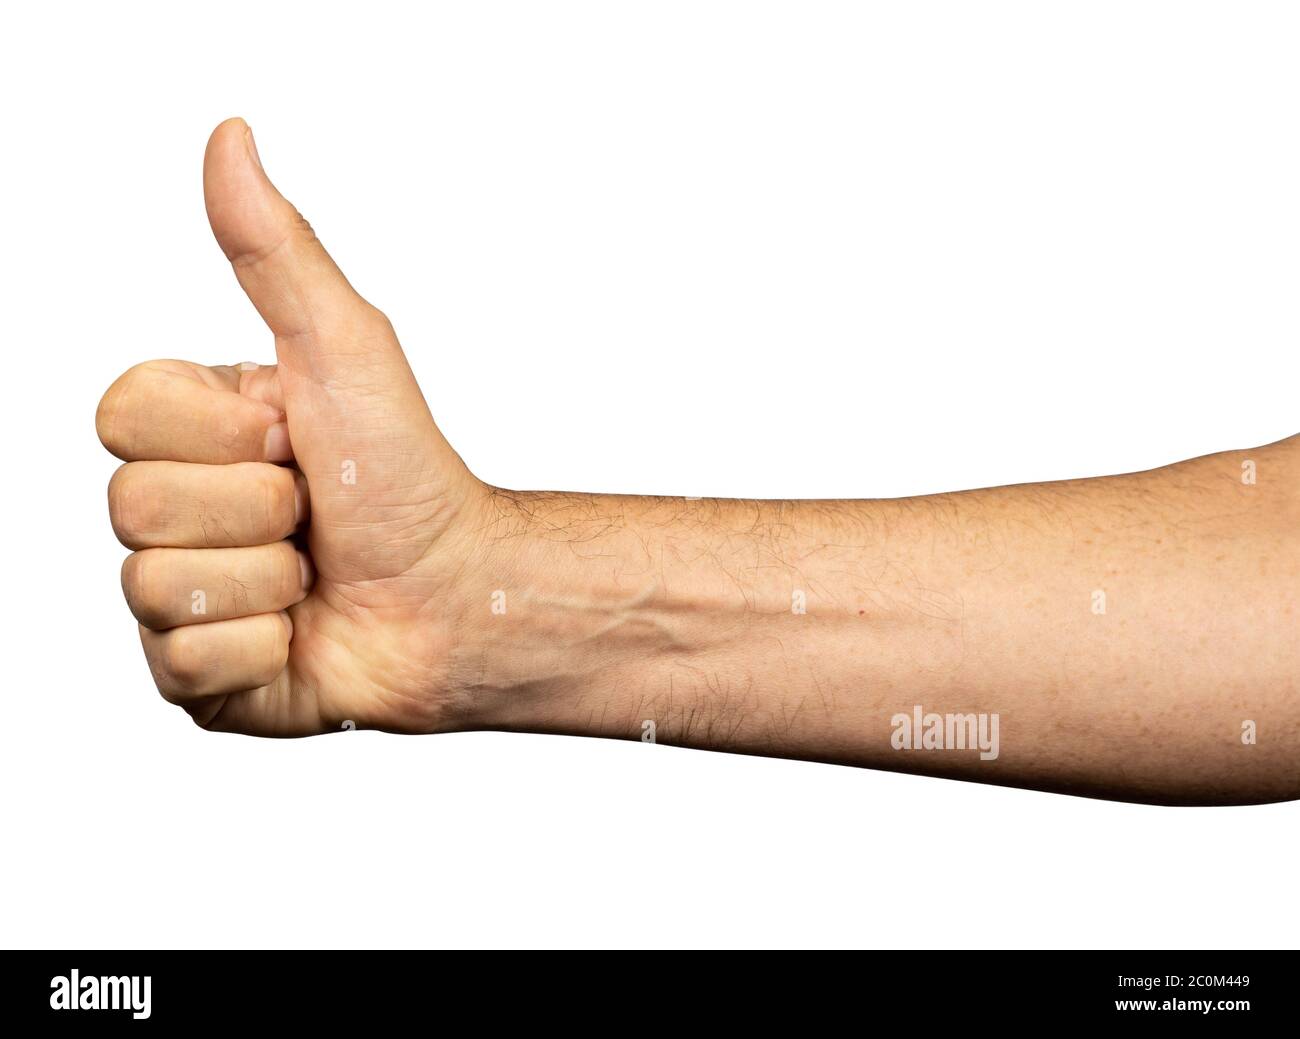 Thumbs up - male hand isolated on white with clipping path included. Stock Photo